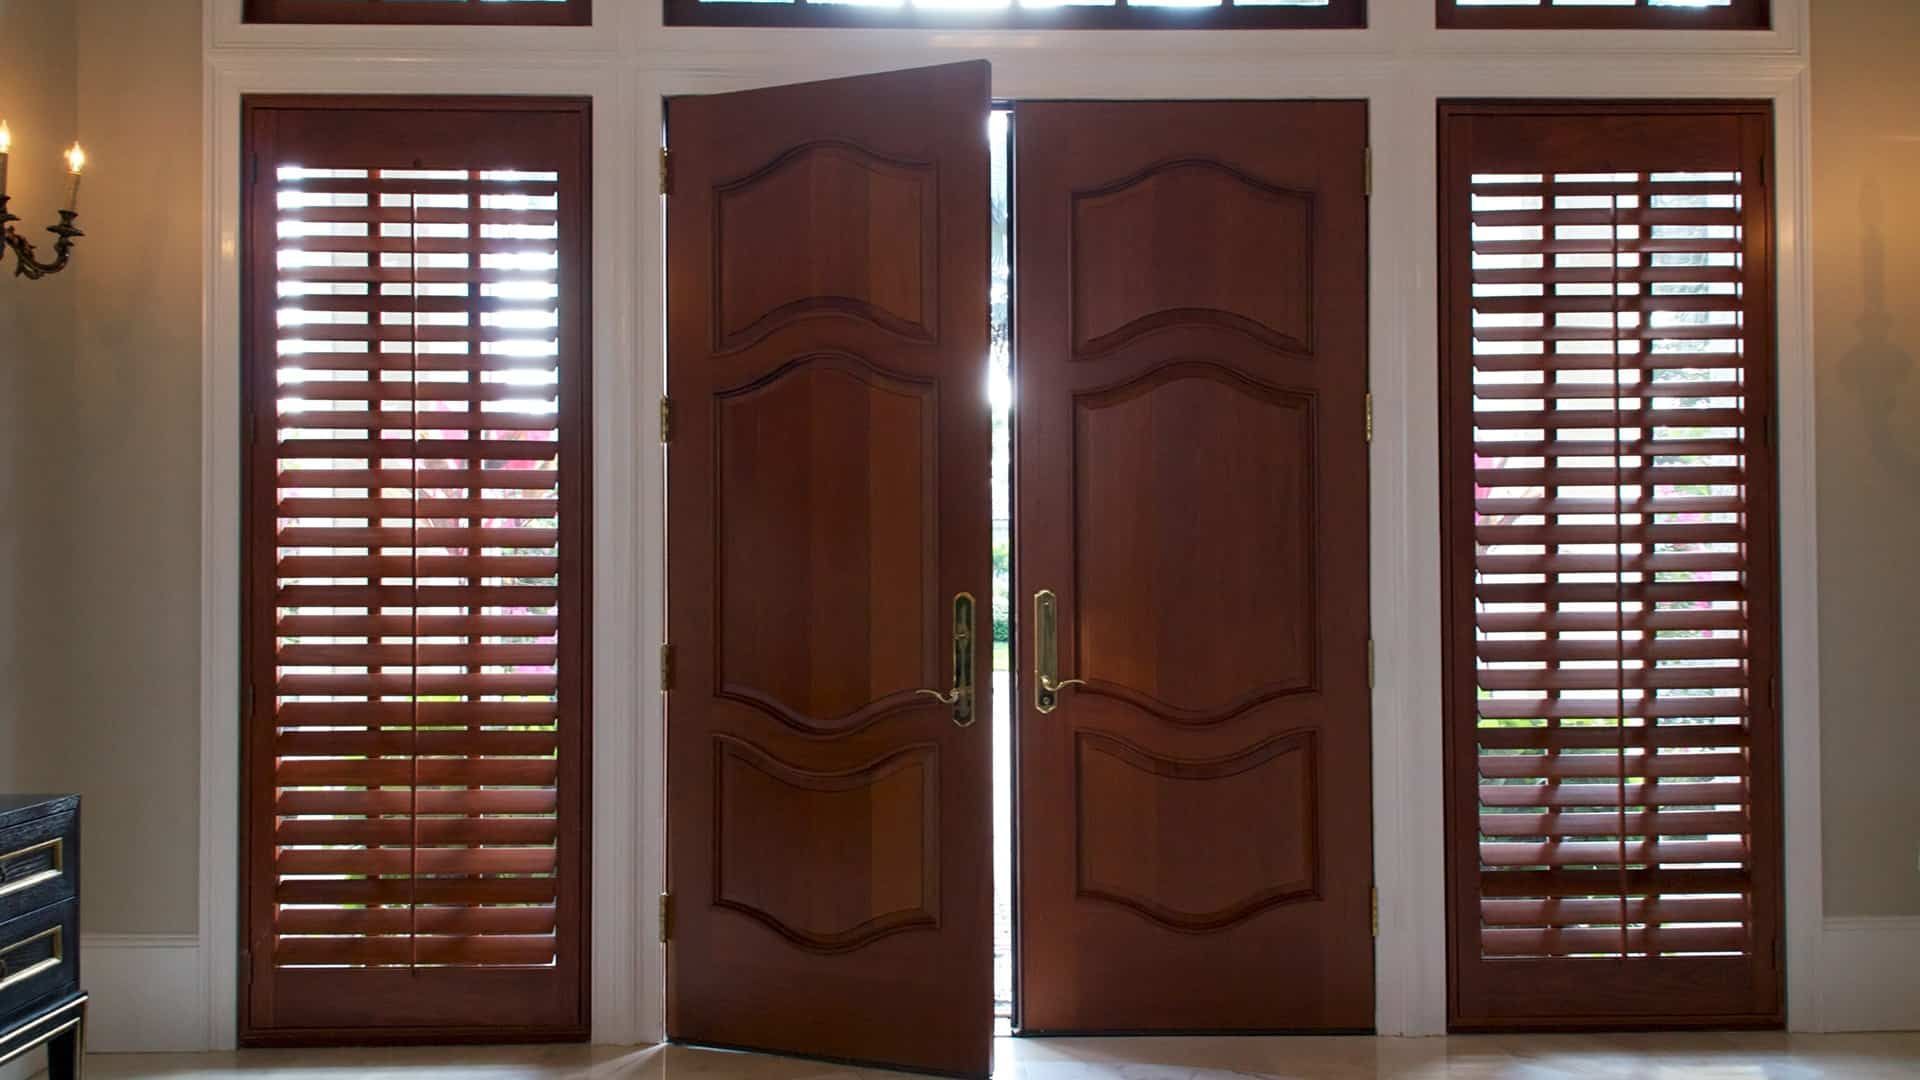 Door with shutters in lots of natural light near San Diego, California